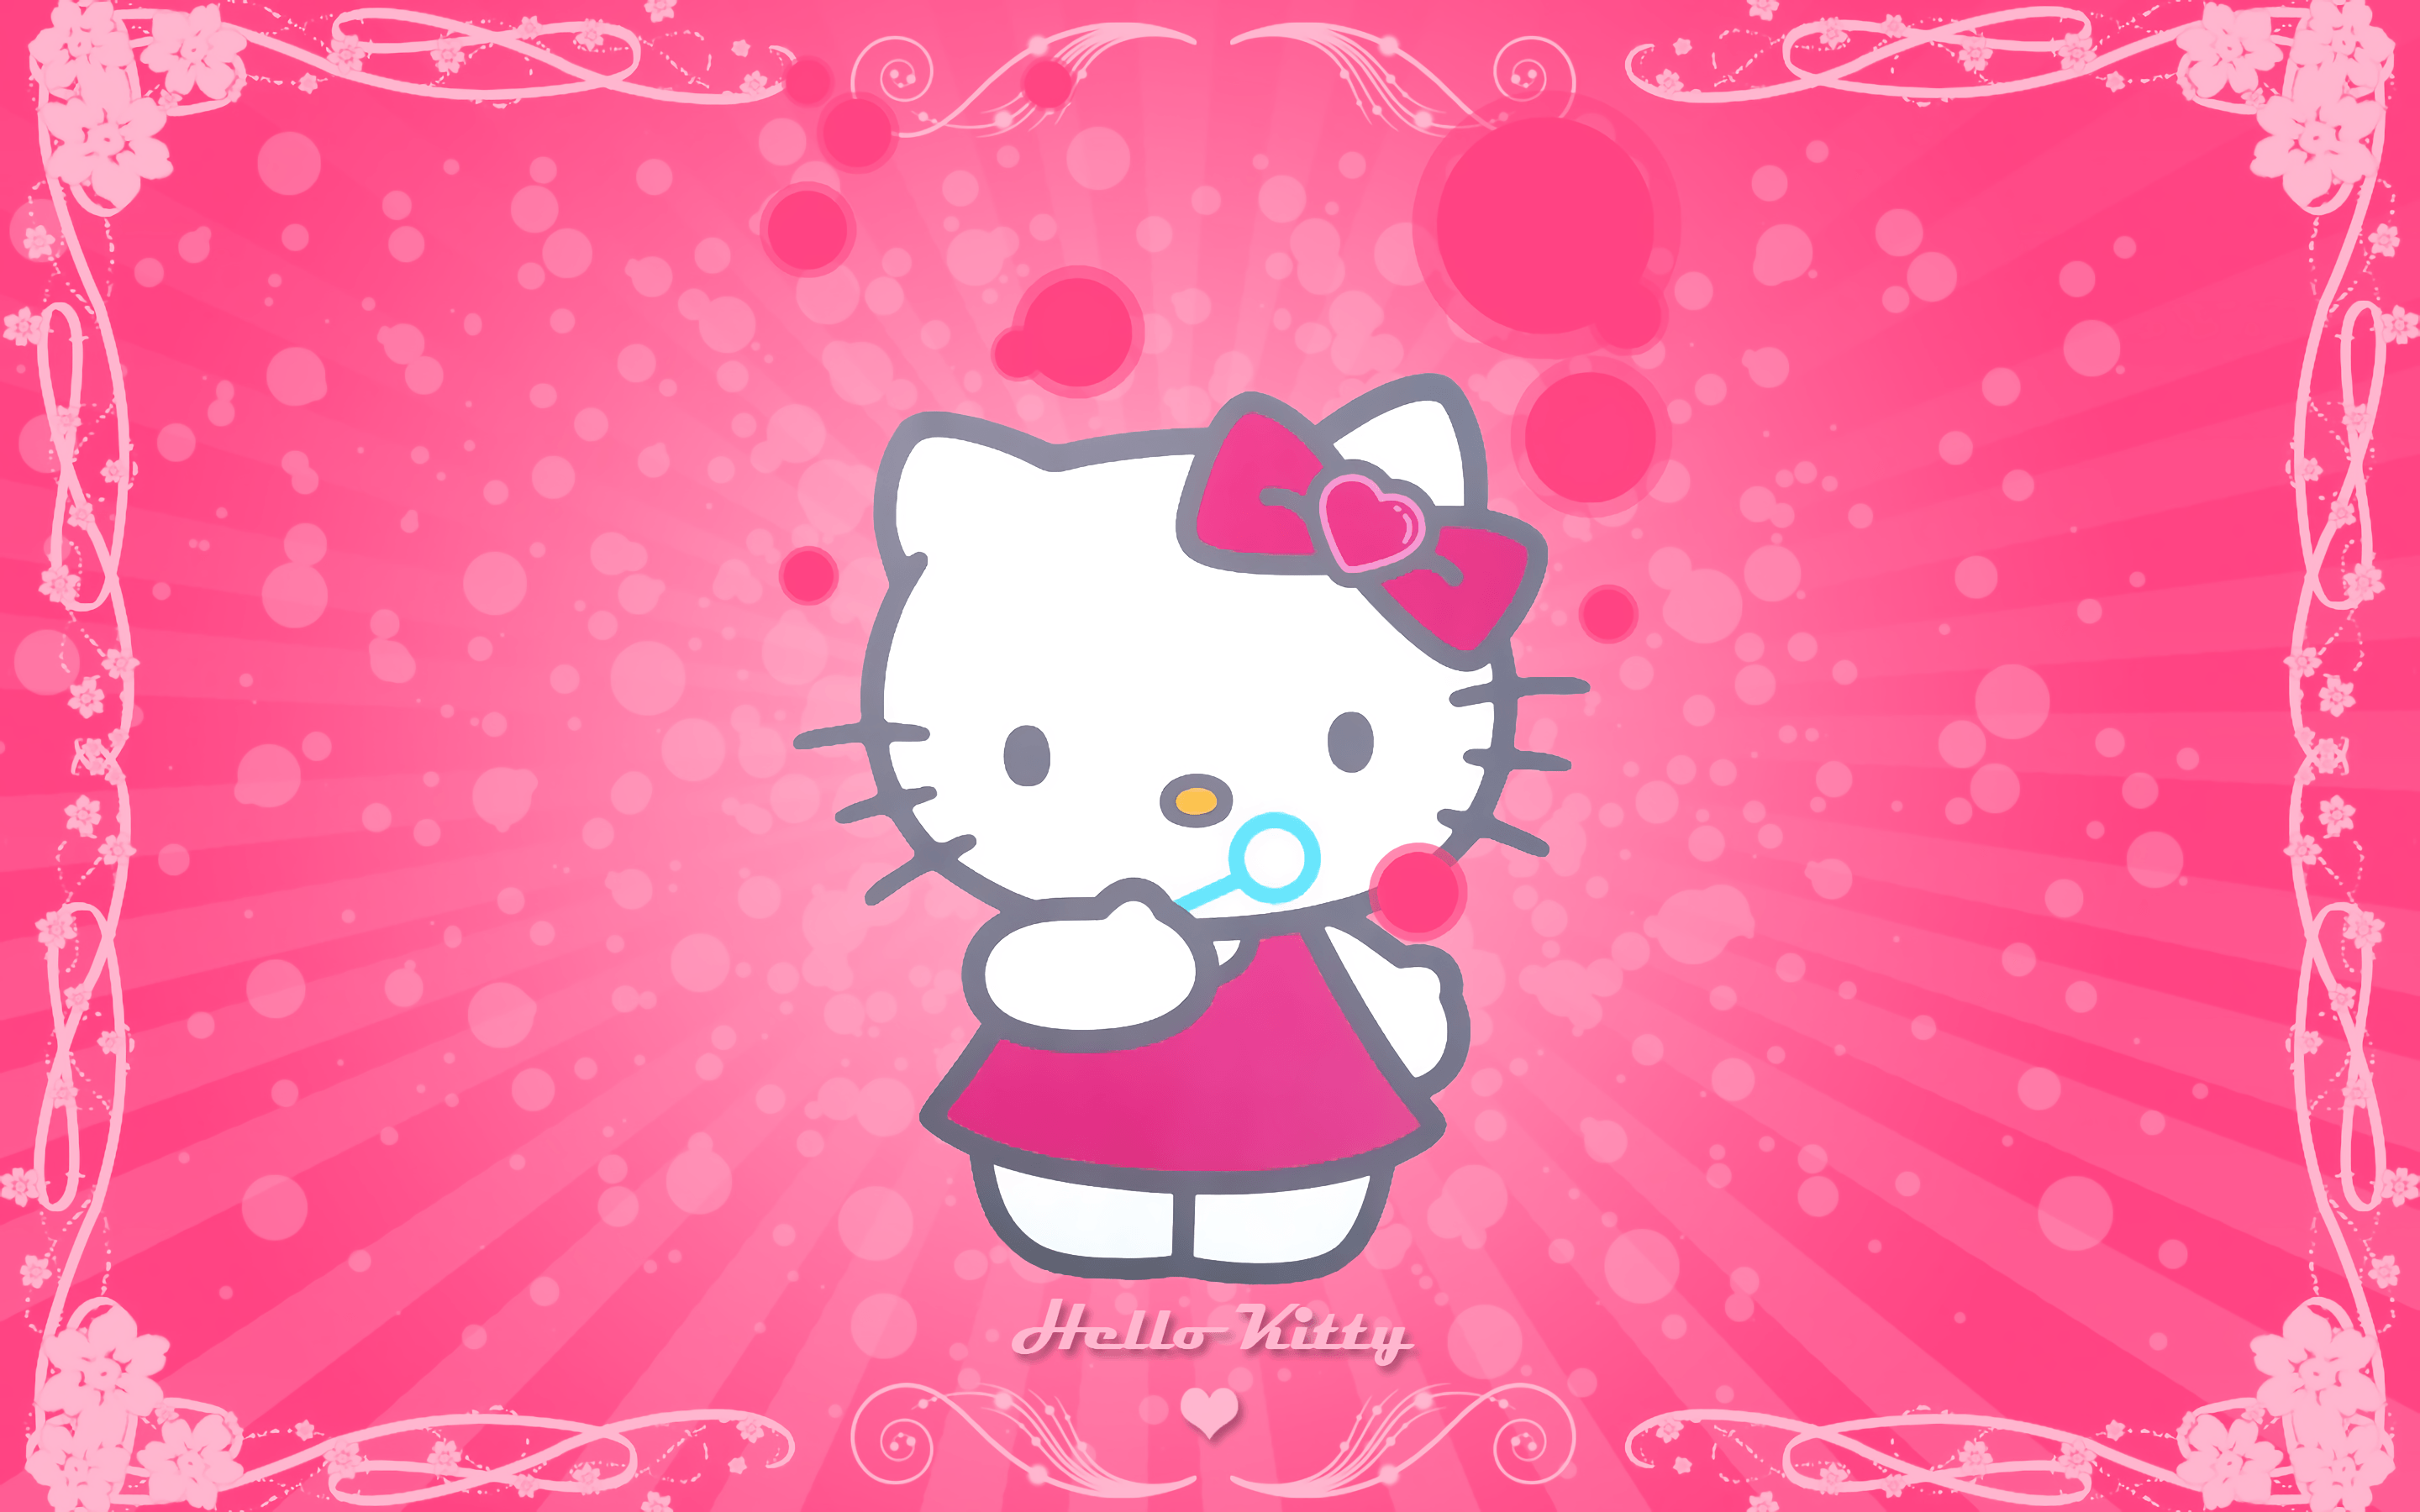 Download Wallpaper Hello Kitty 3d Image Num 42